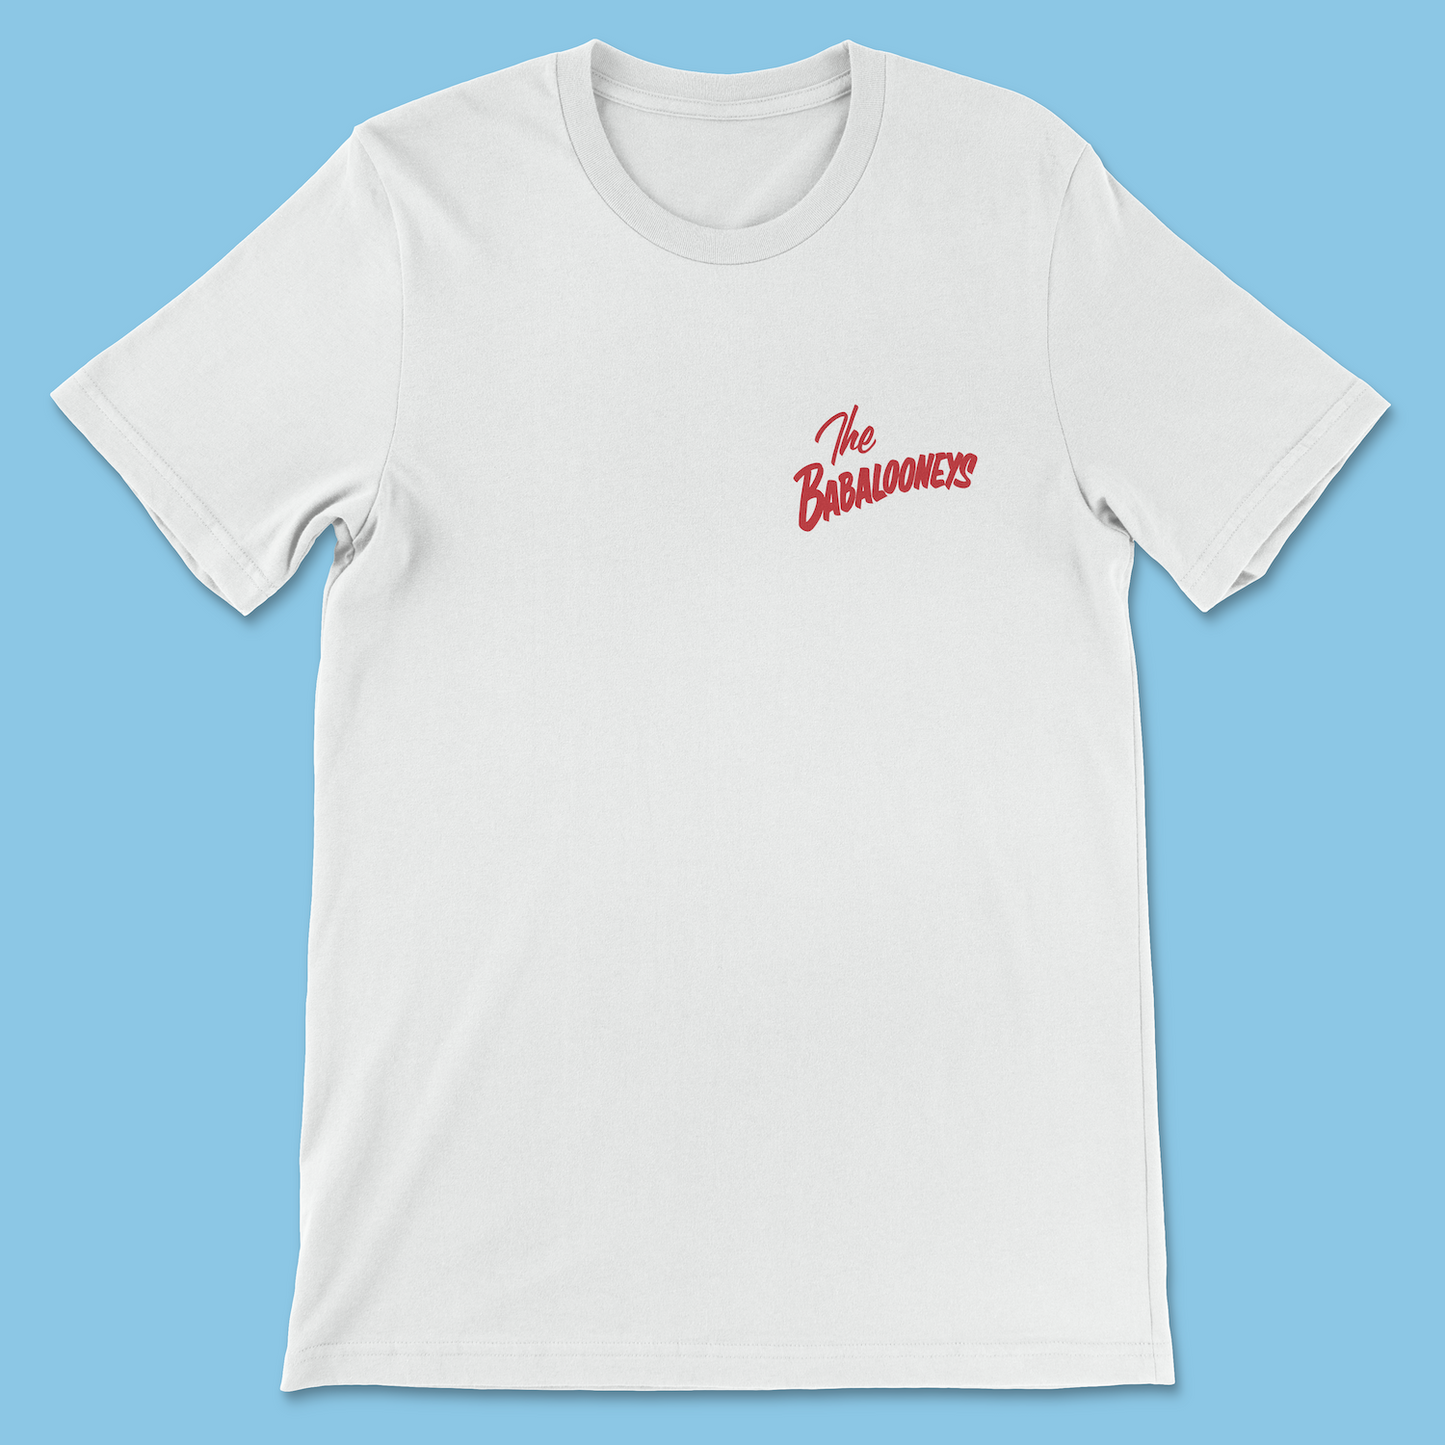 The Babalooneys “Old School” T